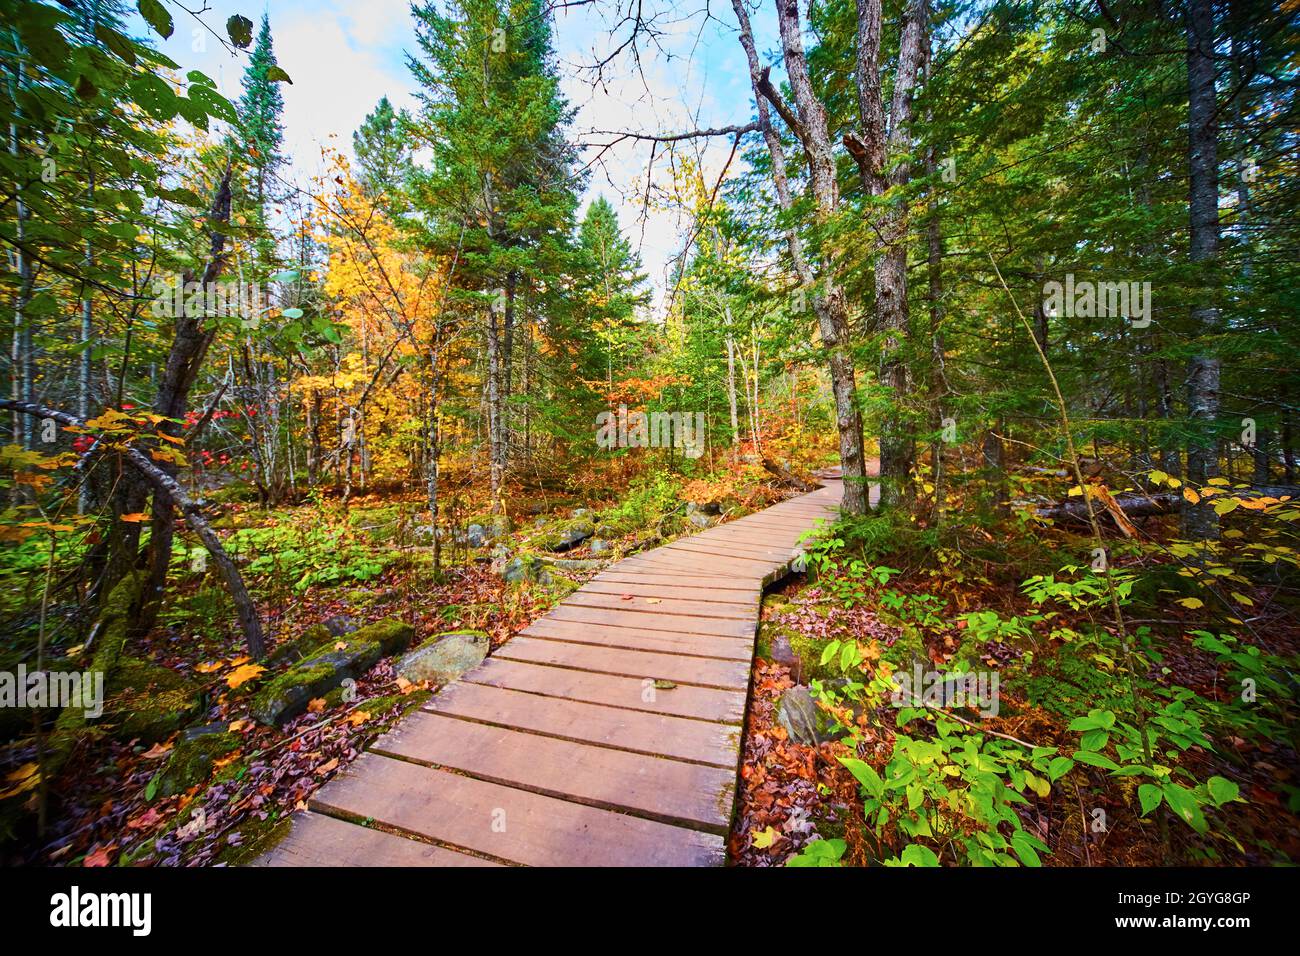 Wooden walkway through green and yellow forest with small shrubs nearby Stock Photo